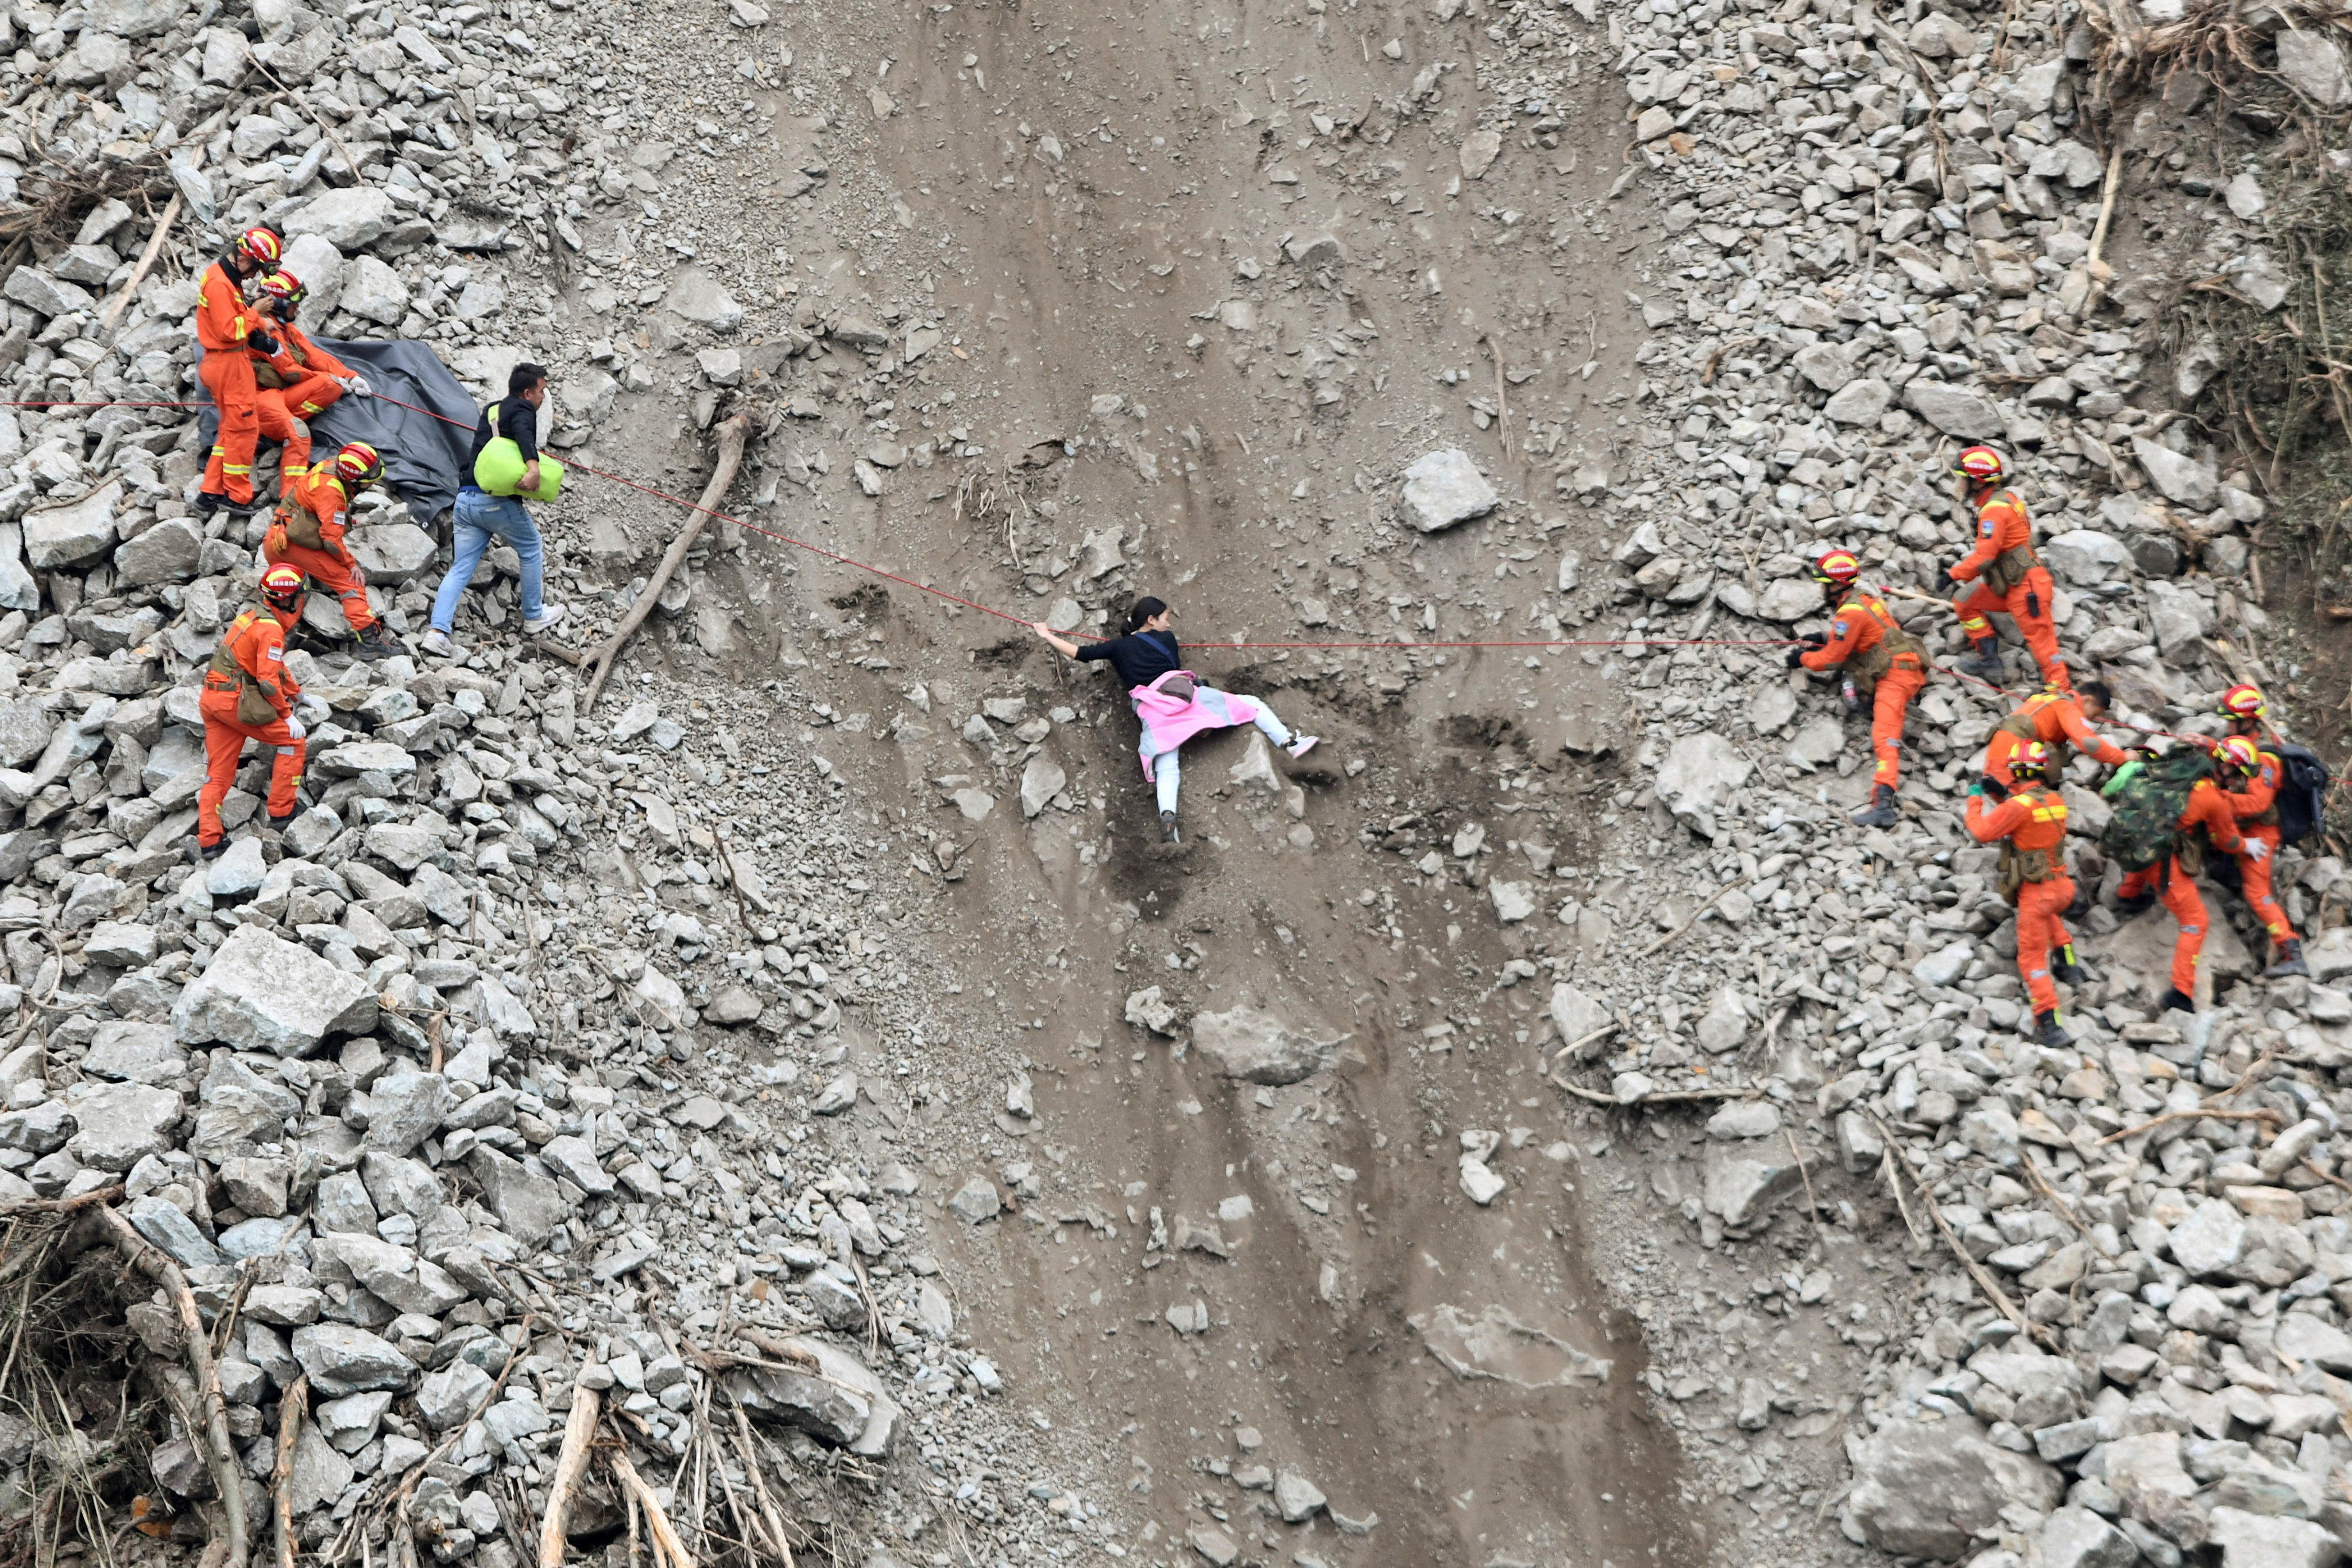 Rescue workers evacuate quake-affected residents at the site of a landslide following a 6.8-magnitude earthquake in Sichuan province, September 6. As the death toll climbed, authorities imposed strict entry requirements to the disaster zone. Photo: Reuters